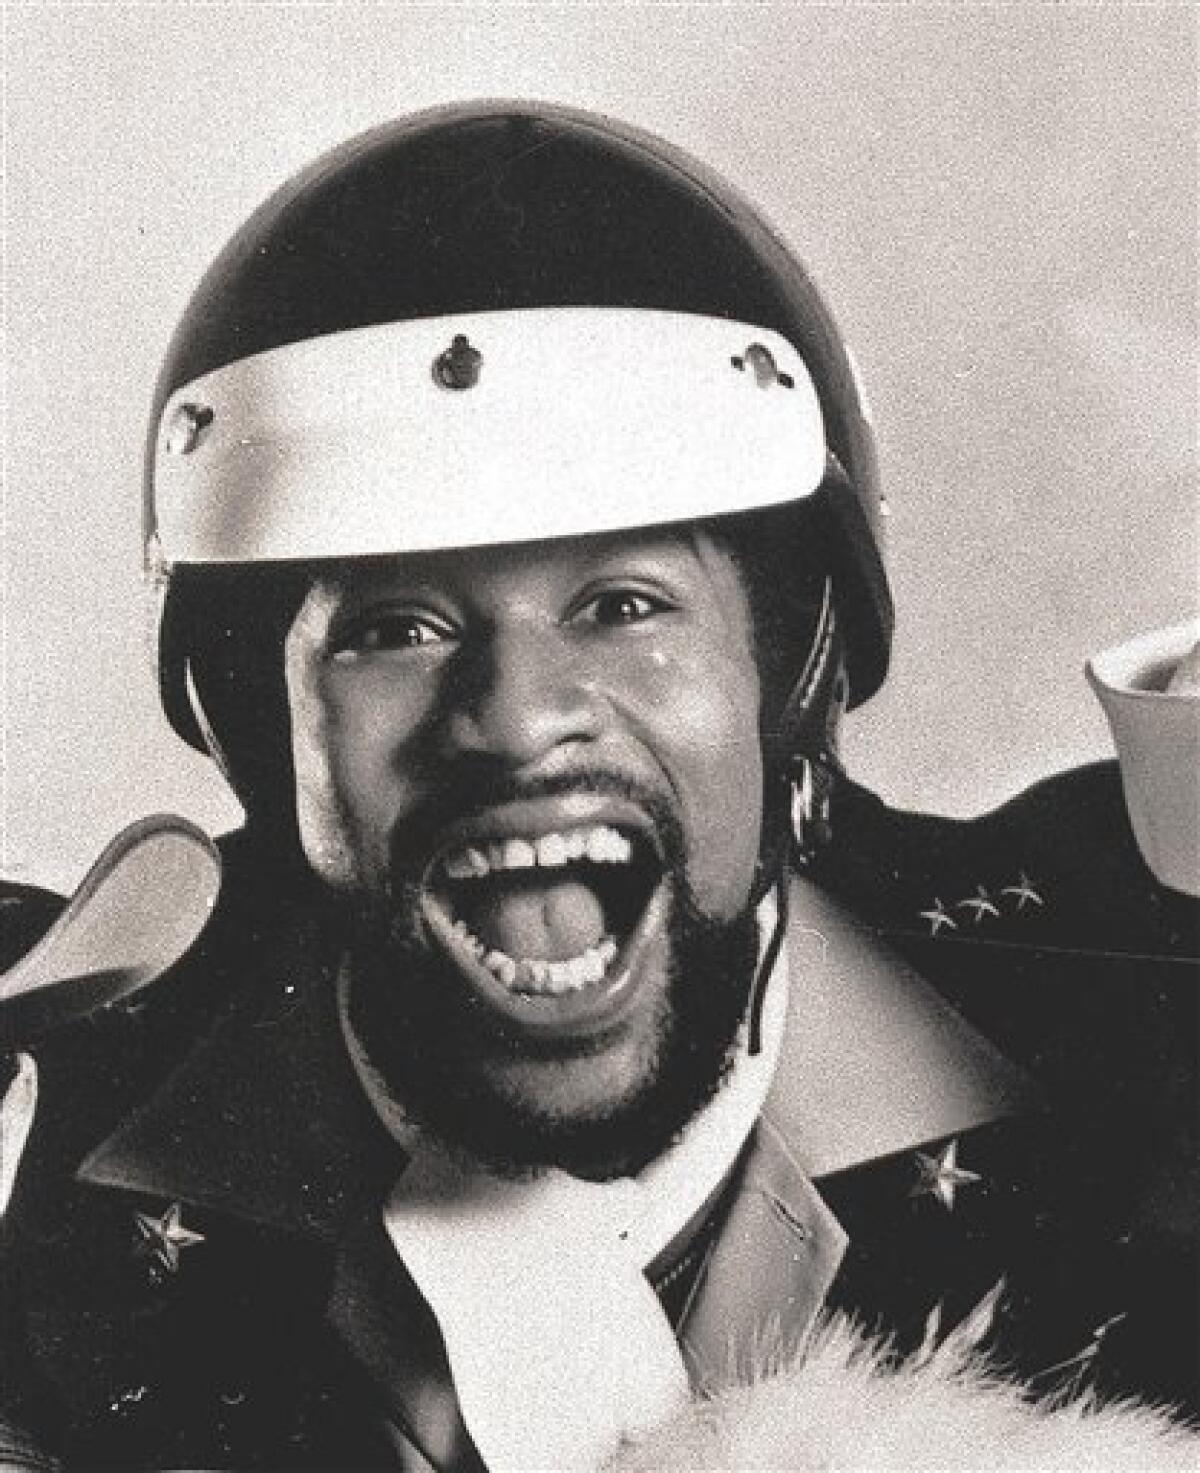 This 1979 file photo shows Victor Willis of pop group Village People. A U.S. District Court judge in Los Angeles awarded Willis attorney's fees this week following copyright litigation over more than two dozen of the group's songs, including "Y.M.C.A.," "Macho Man" and "In the Navy." (AP Photo/Cant Stop Productions, HO)